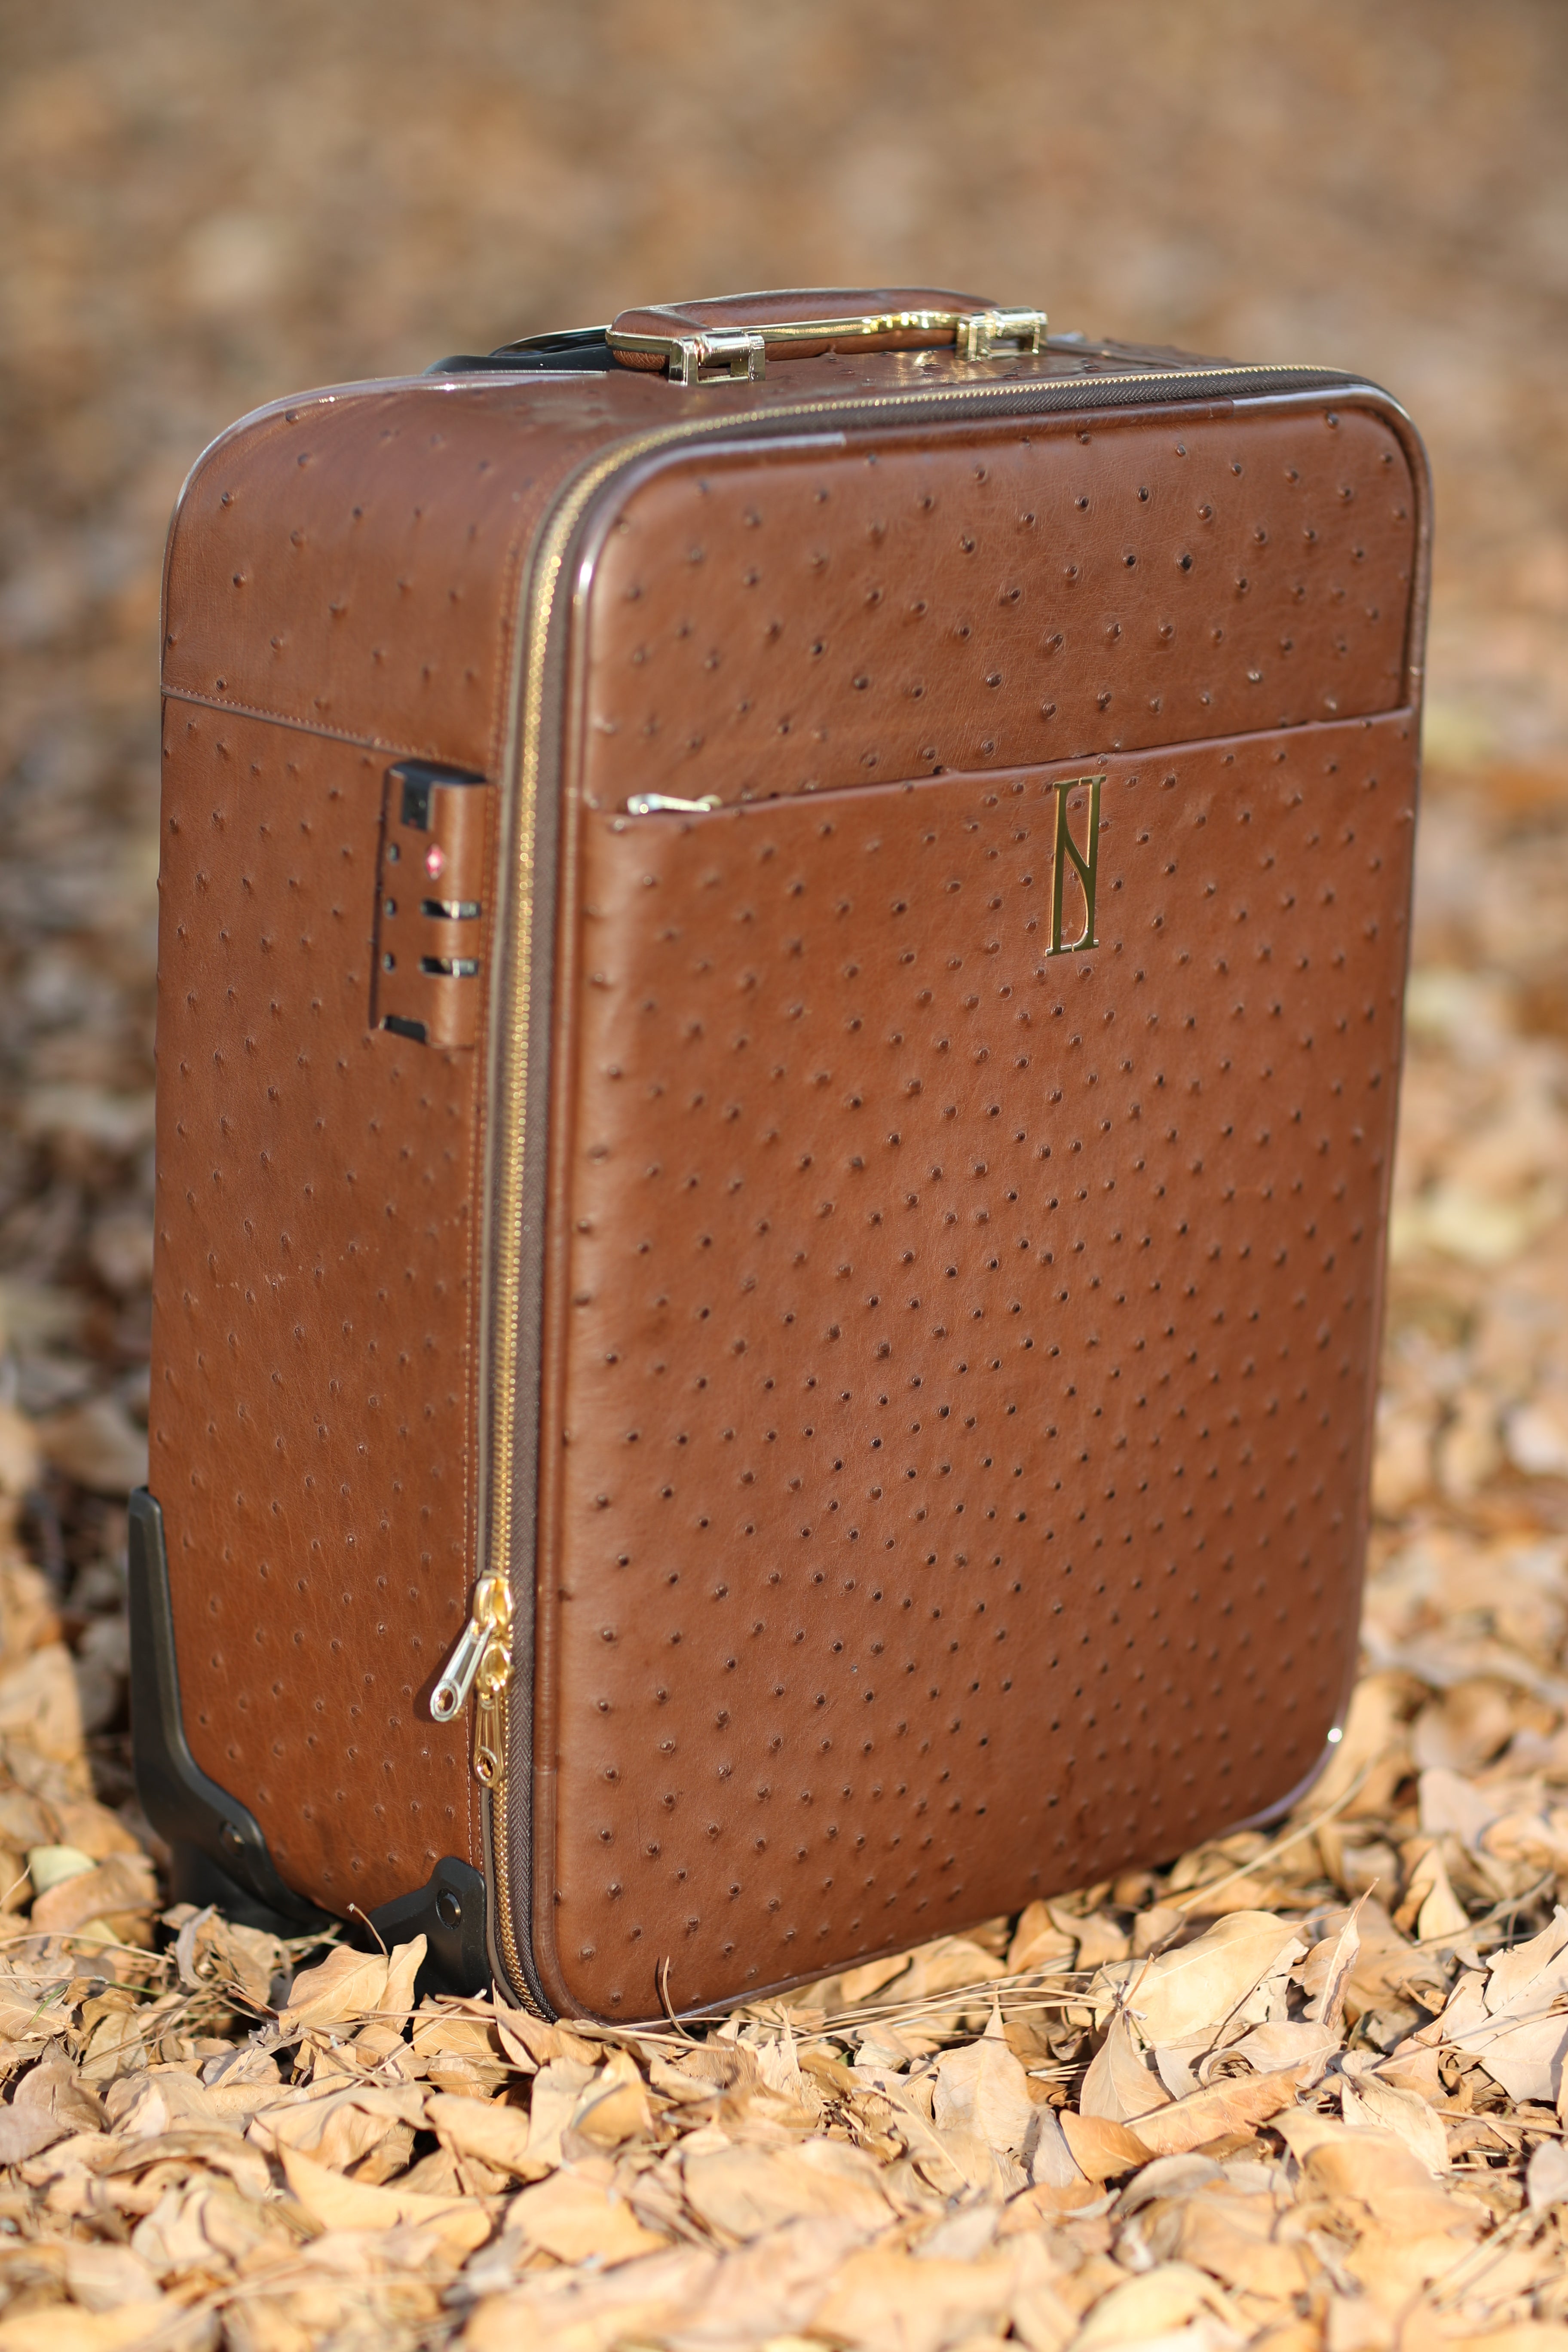 Buy Rare and Valuable Leader Luggage Online - Haute Skin